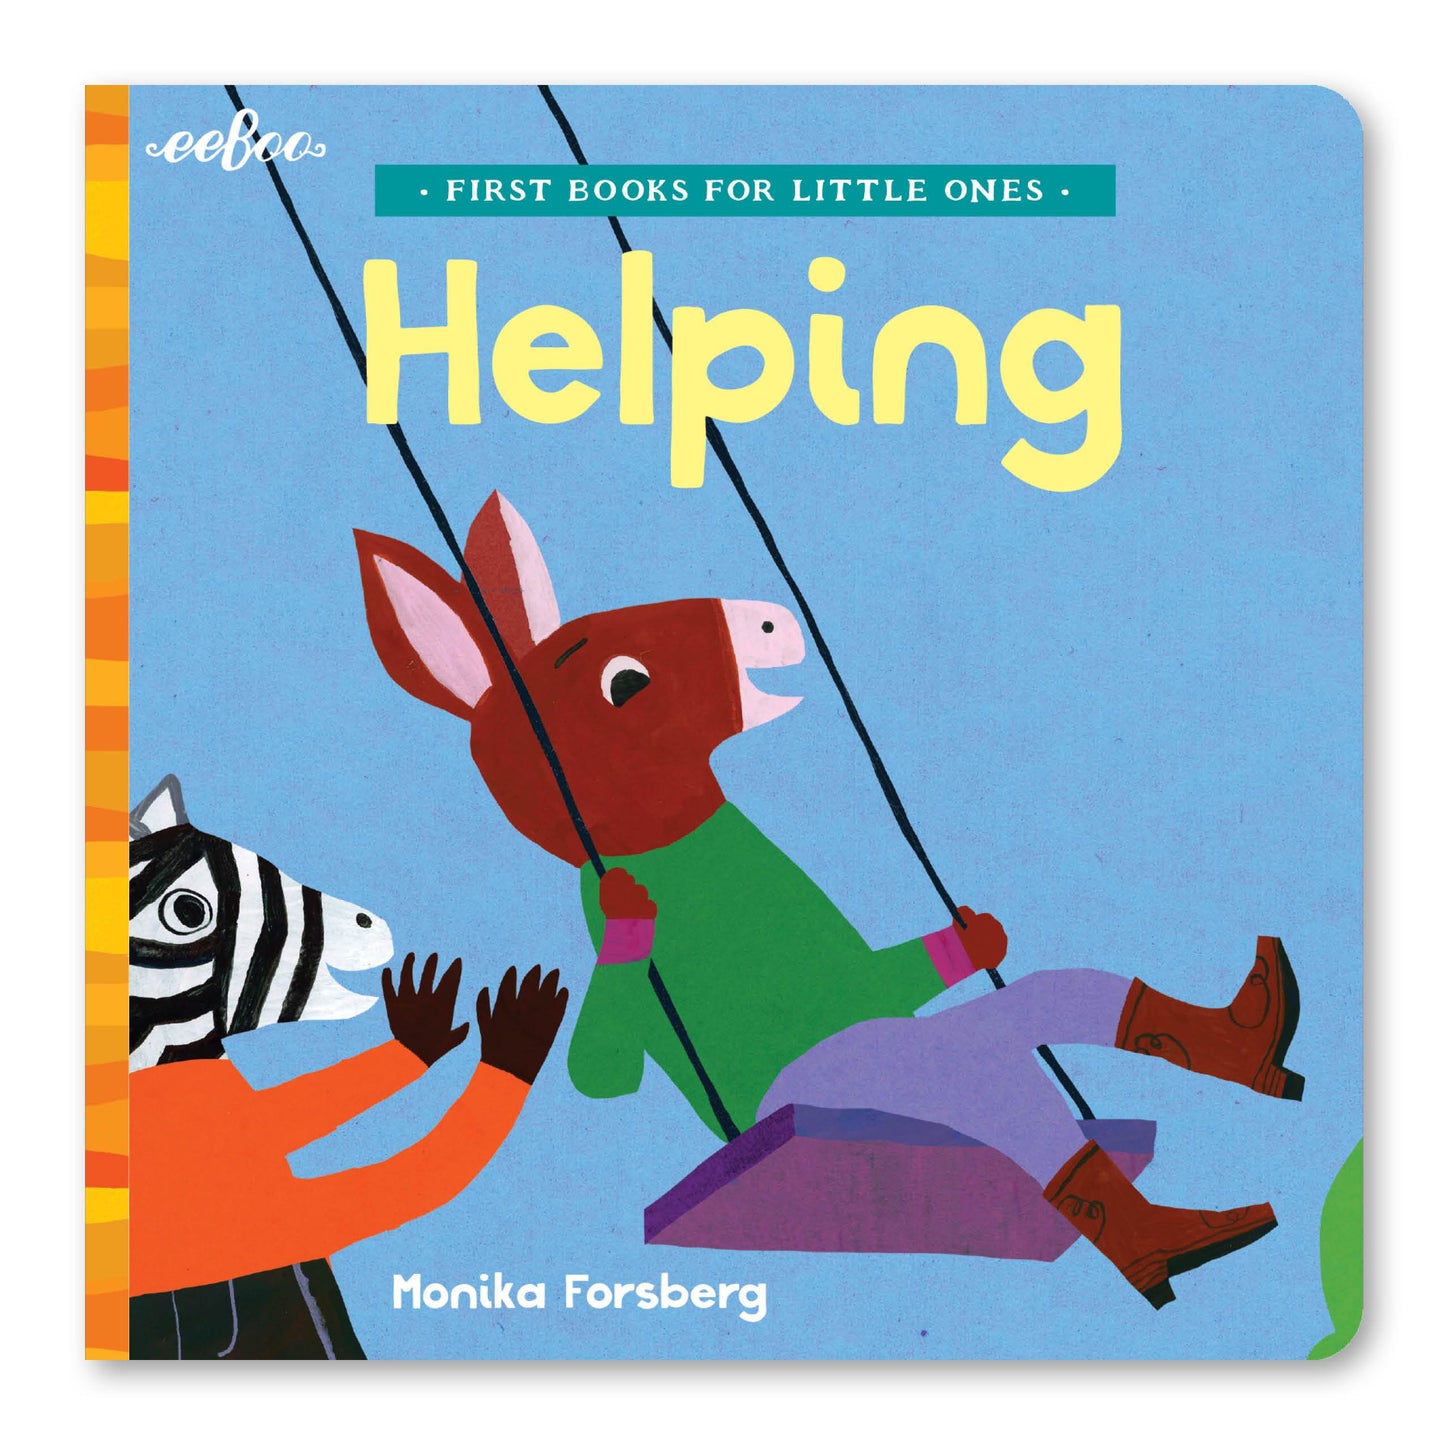 First Books for Little Ones: Helping